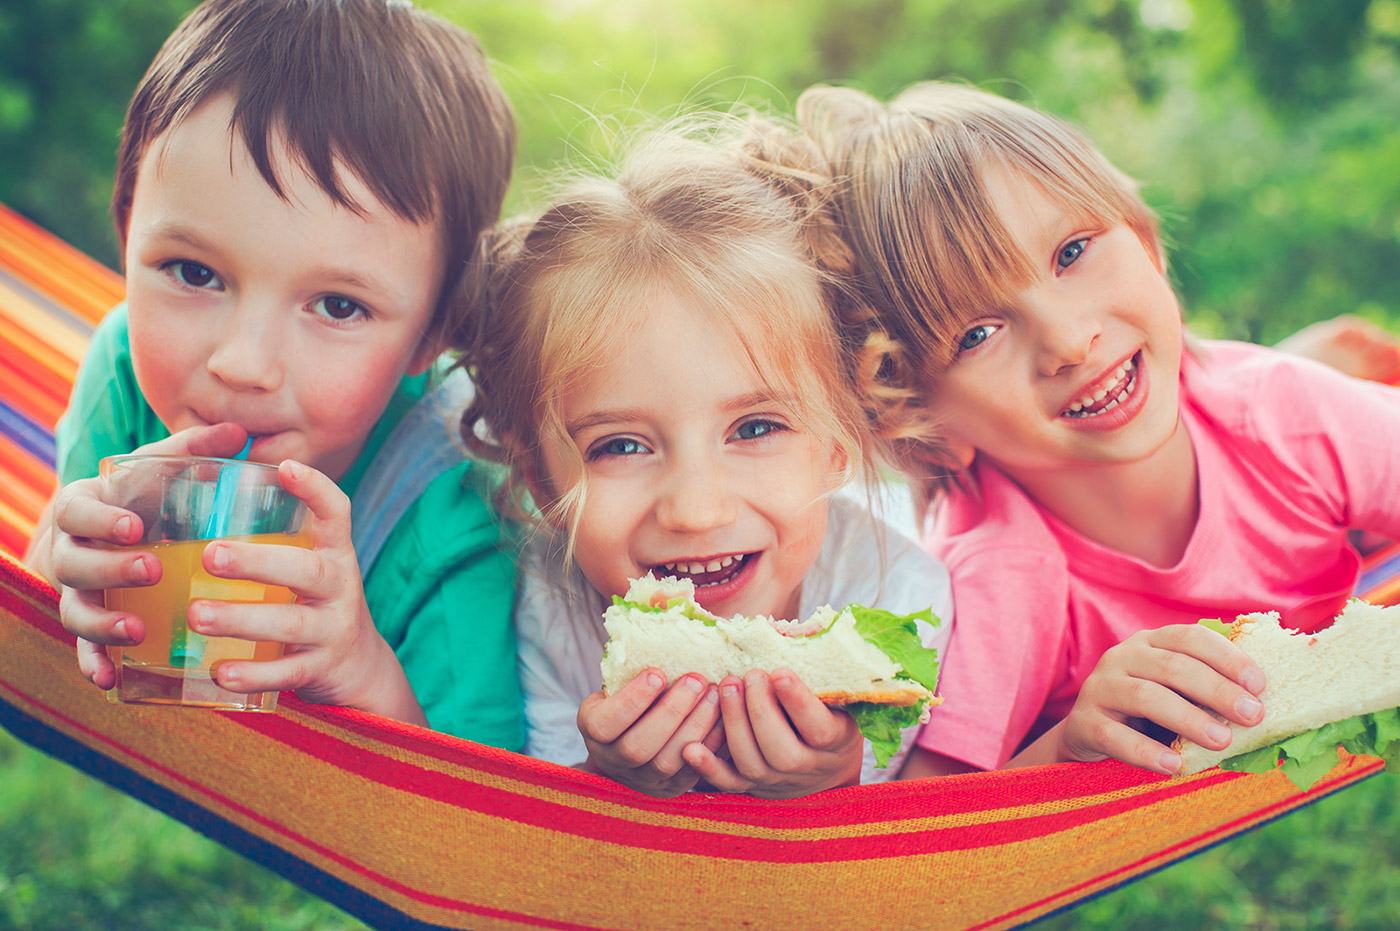 Three children sitting together in a hammock eating sandwiches.